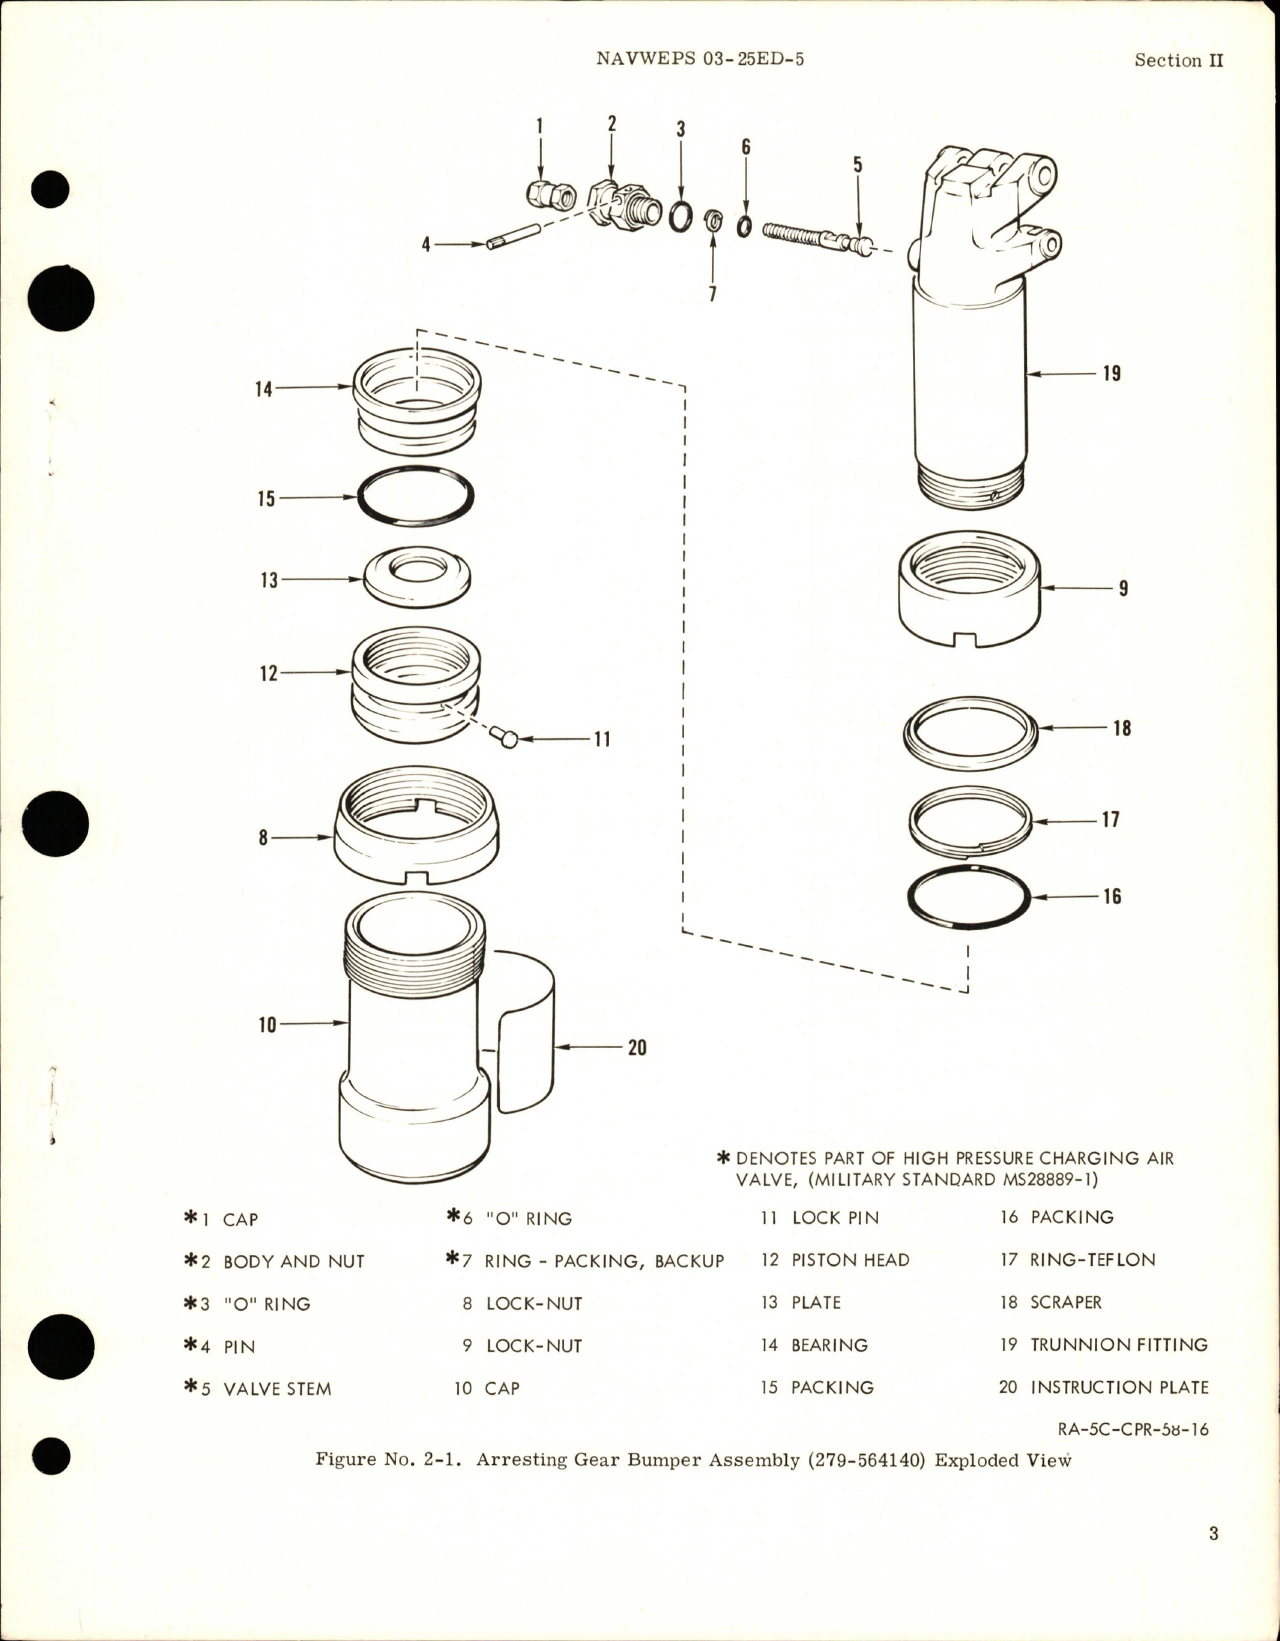 Sample page 5 from AirCorps Library document: Overhaul Instructions for Arresting Gear Bumper Assembly - Part 279-564140